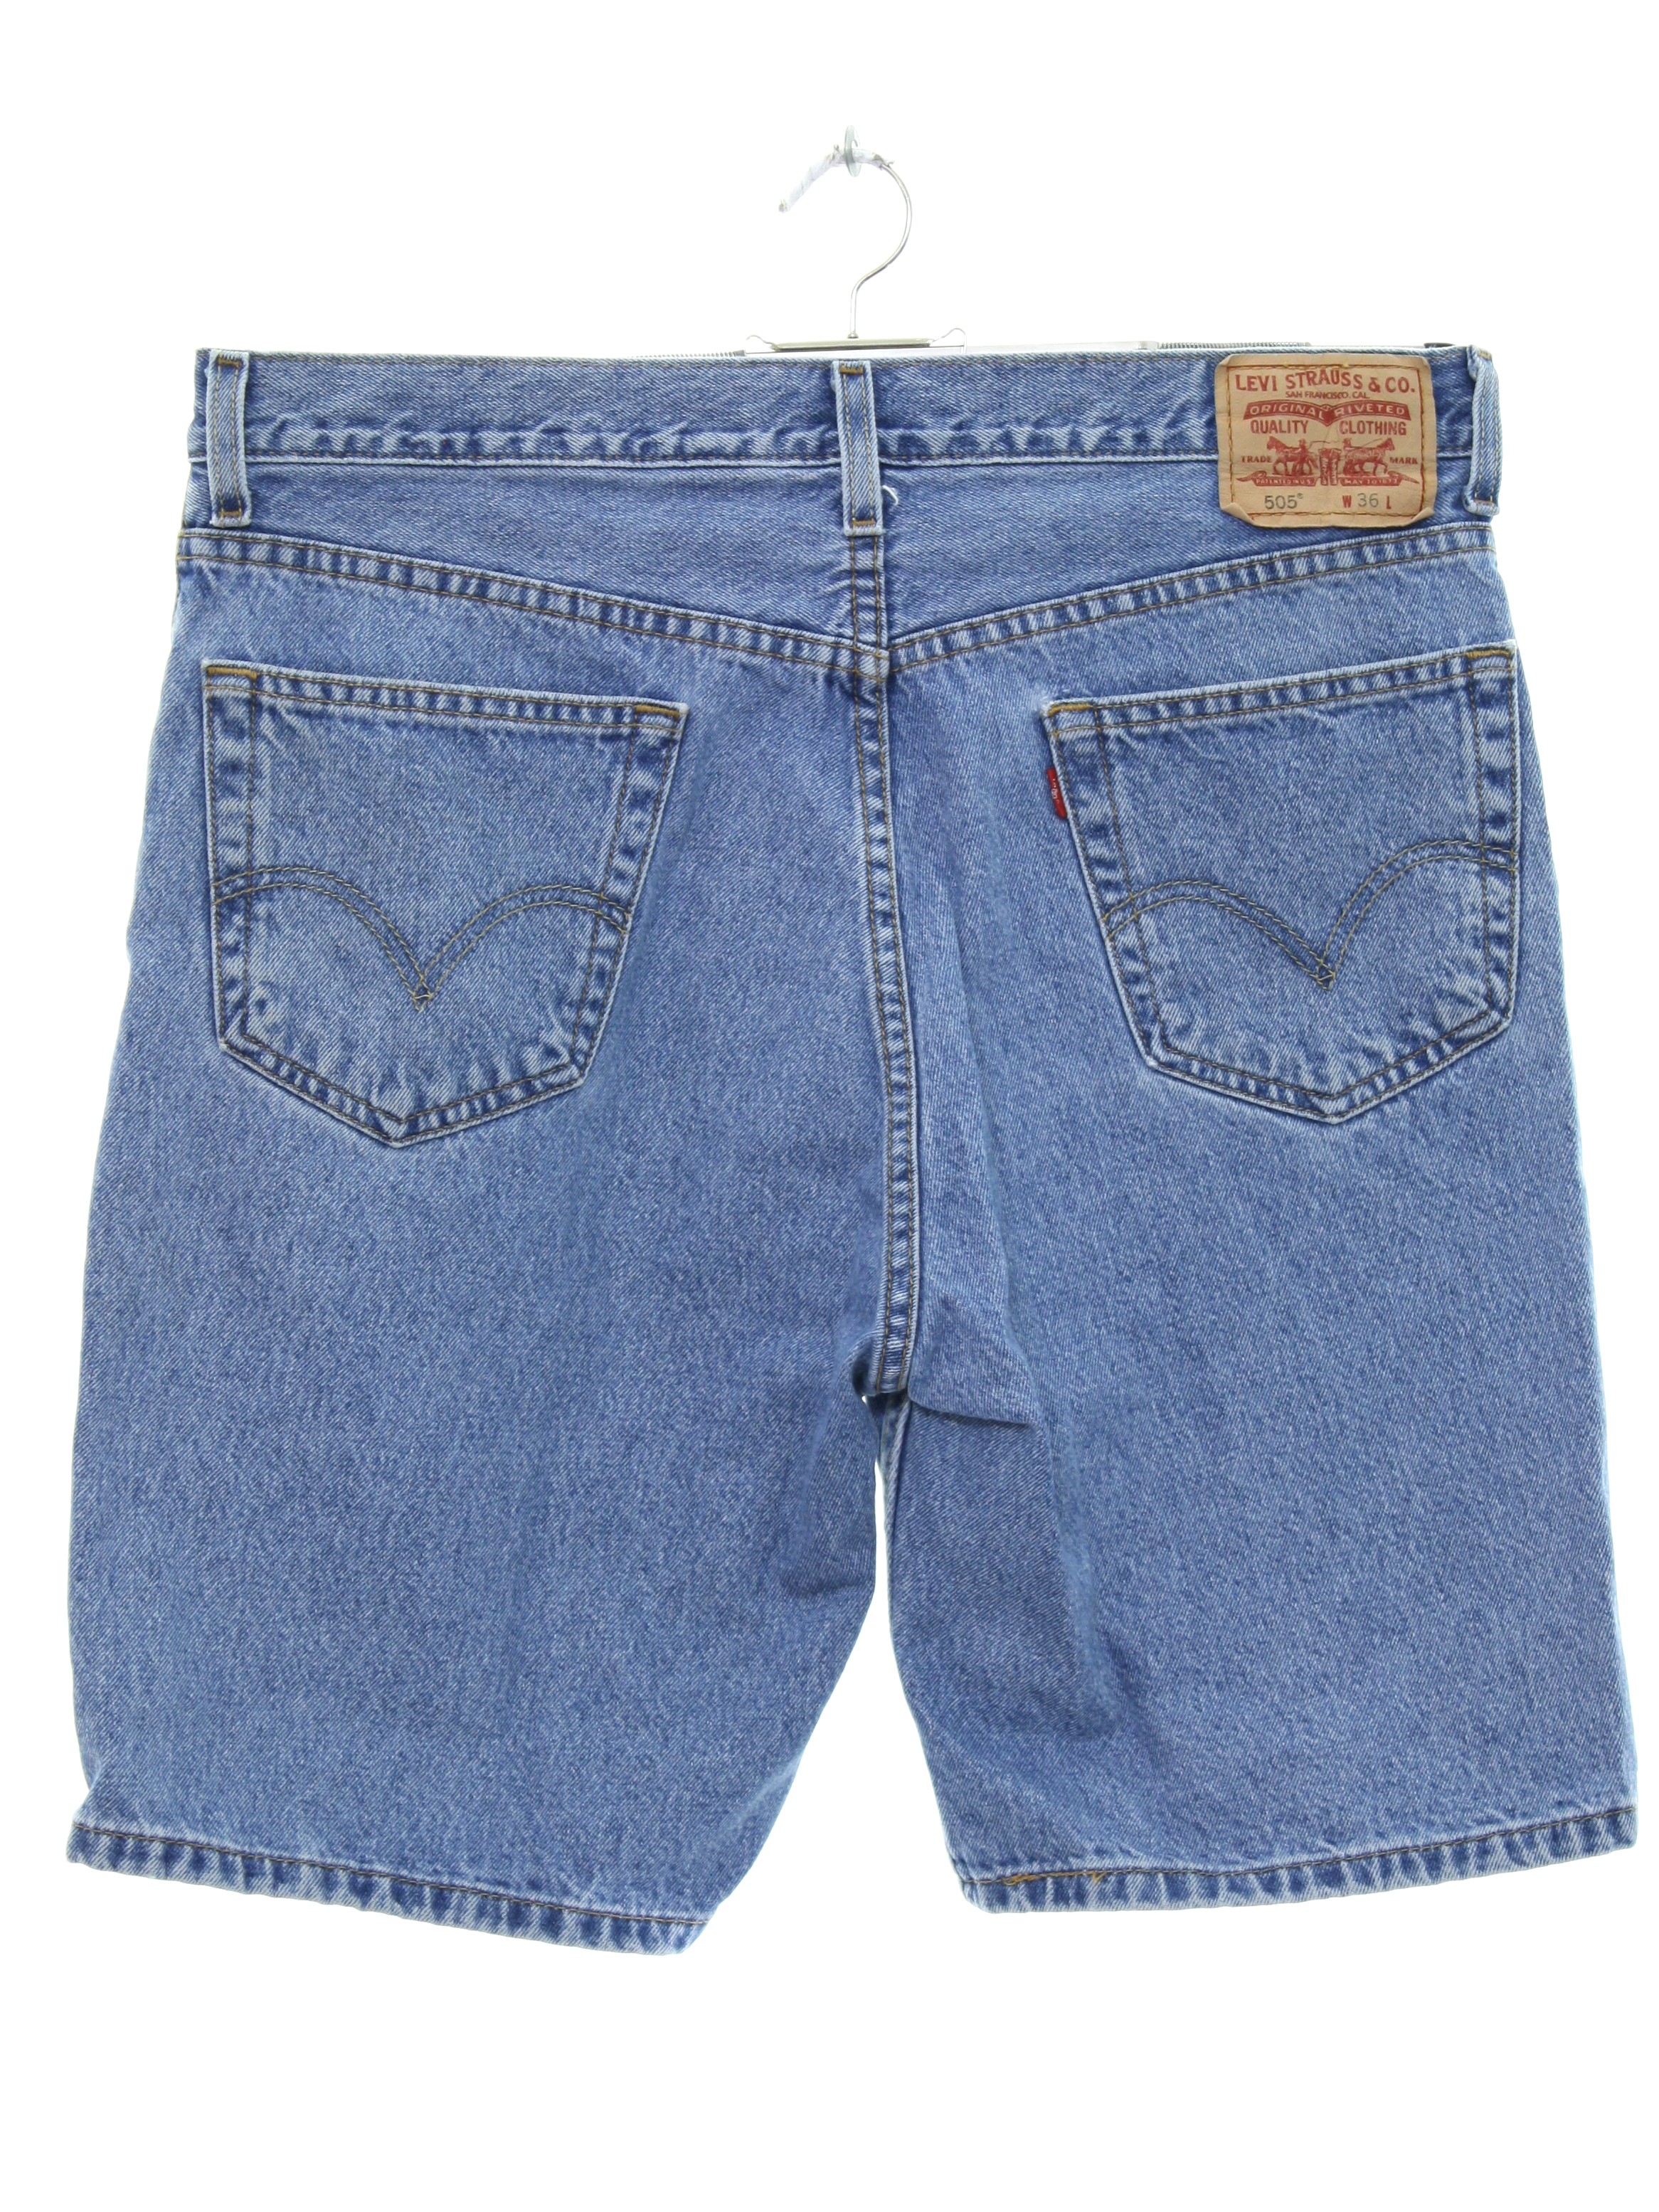 Levis 505 Nineties Vintage Shorts: Late 90s -Levis 505- Mens blue stonewash  background cotton grunge denim shorts. These jorts feature the classic 5  pocket style, red small e Levis tab, and paper